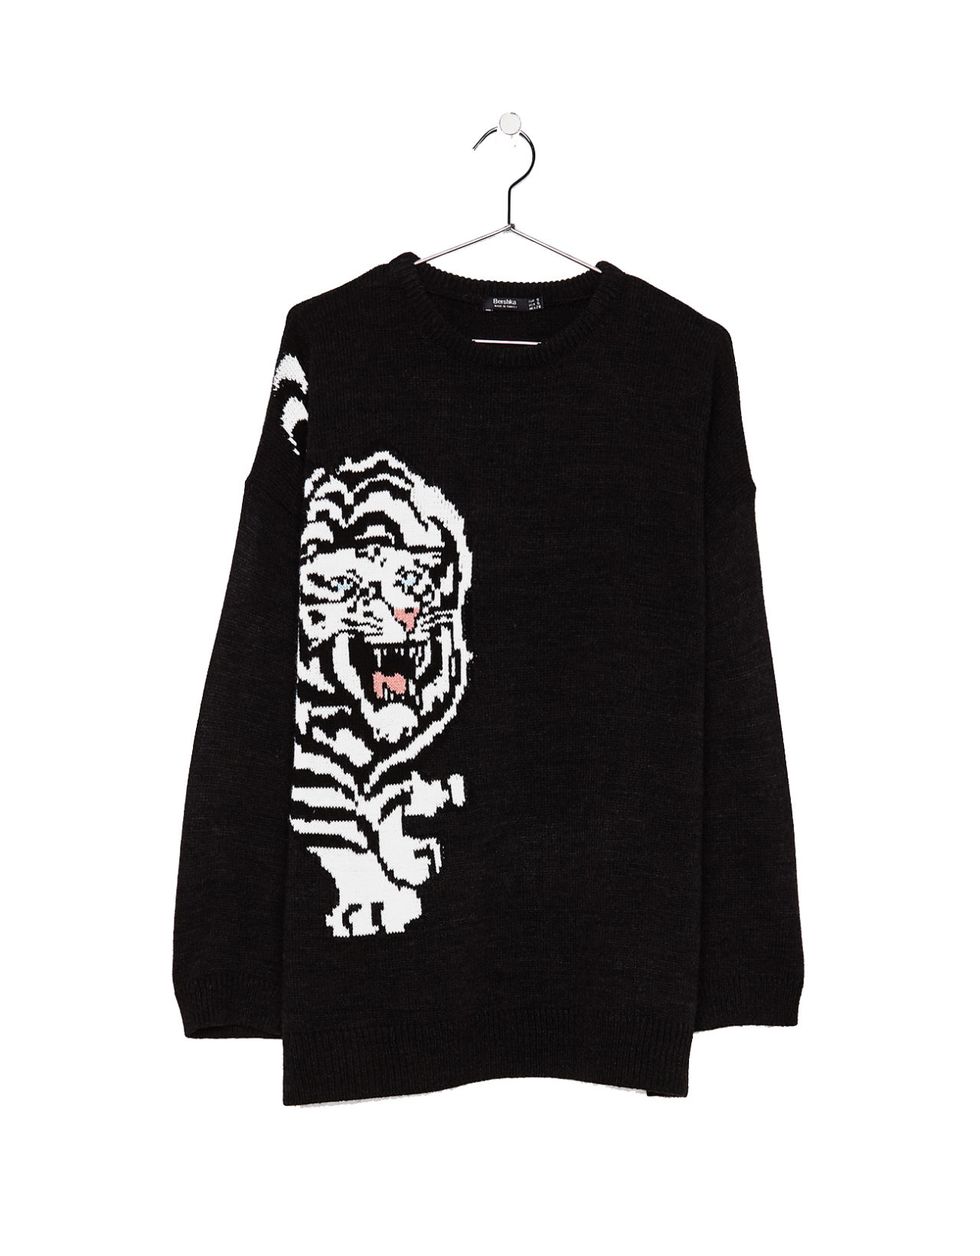 Clothing, Long-sleeved t-shirt, Sleeve, Black, White, T-shirt, Outerwear, Top, Sweater, Neck, 